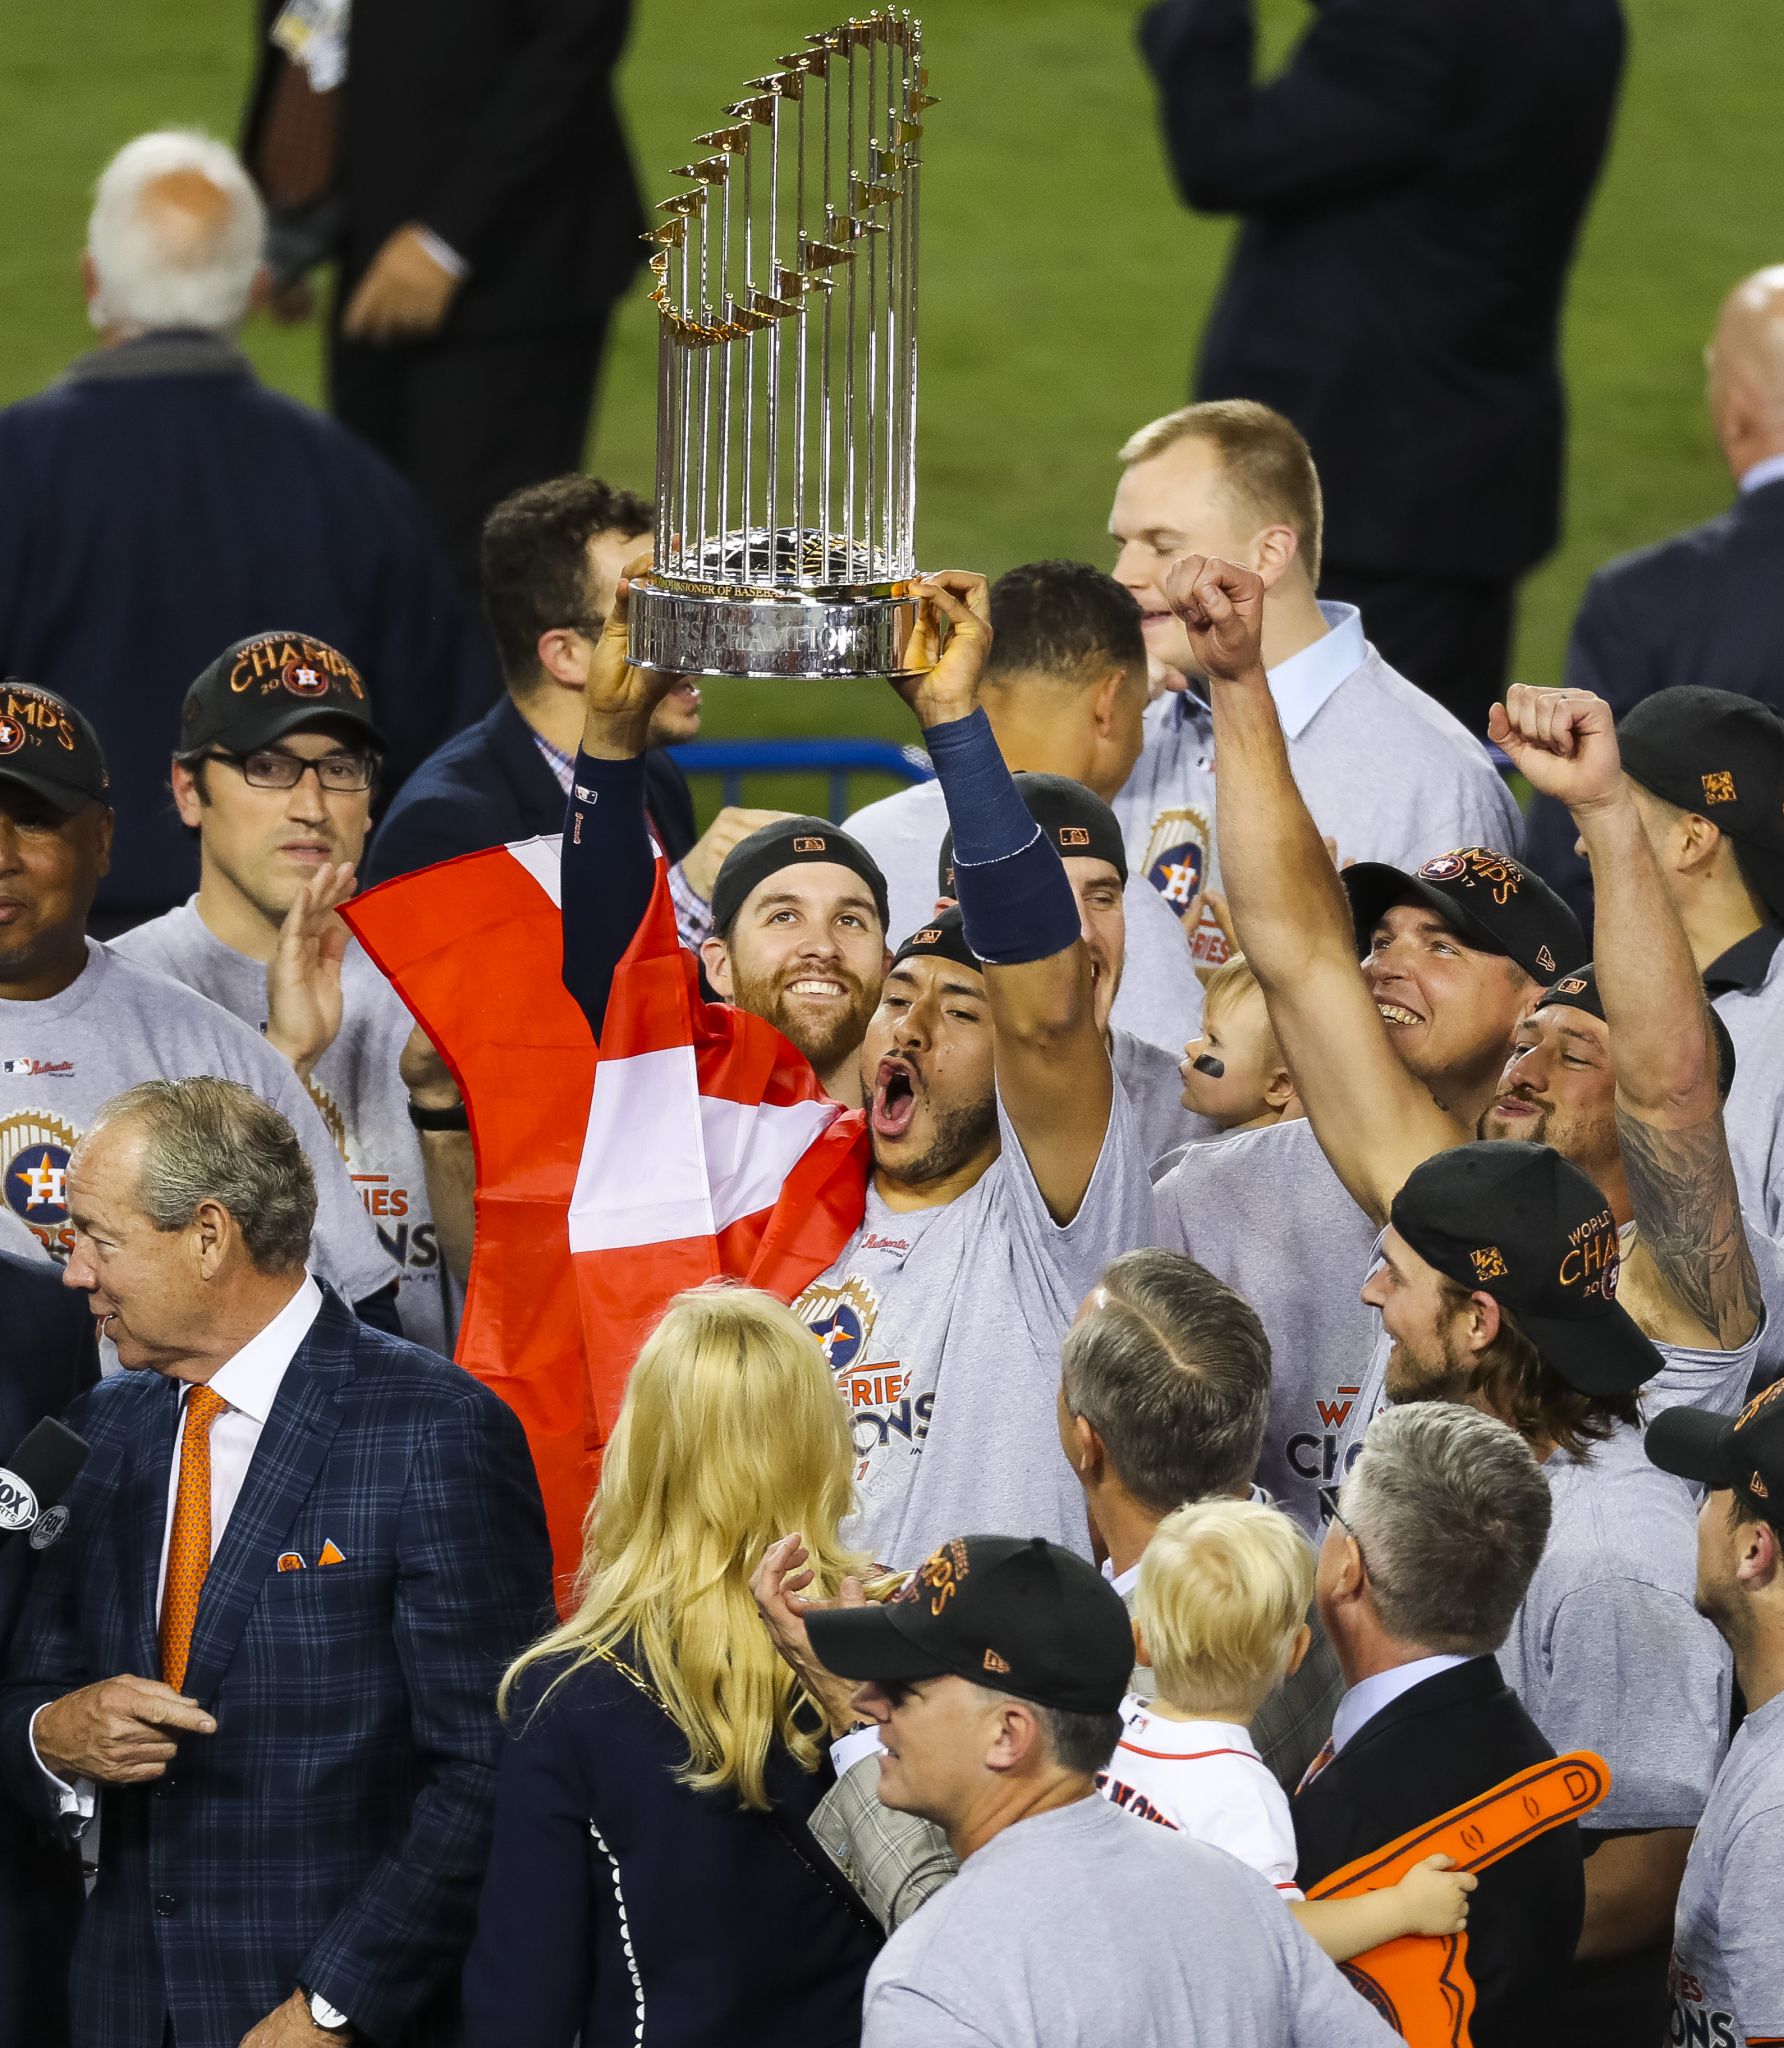 Get a peek at the Houston Astros World Series Championship gear you can own